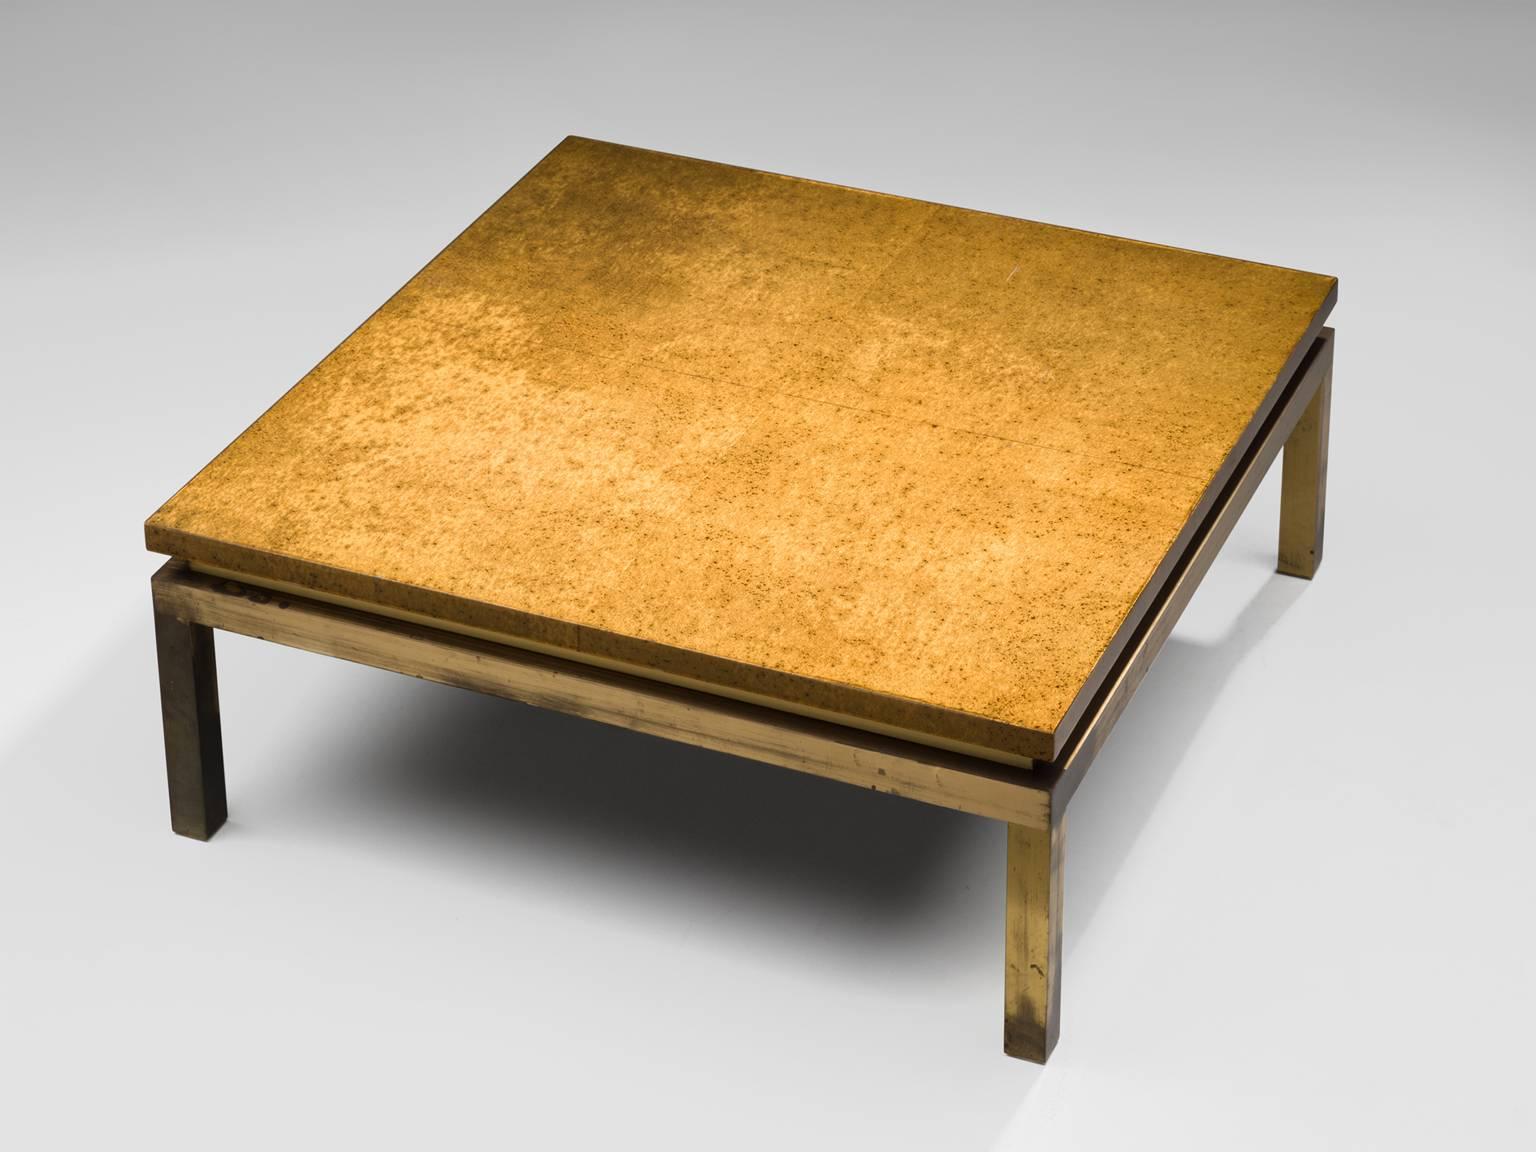 Coffee table, brass and lacquered wood, Europe, 1950s.

This sparkling solid coffee table with brass base is all about material. The design itself is fairly simple with a square top and base and four legs. There is a space between the top and the